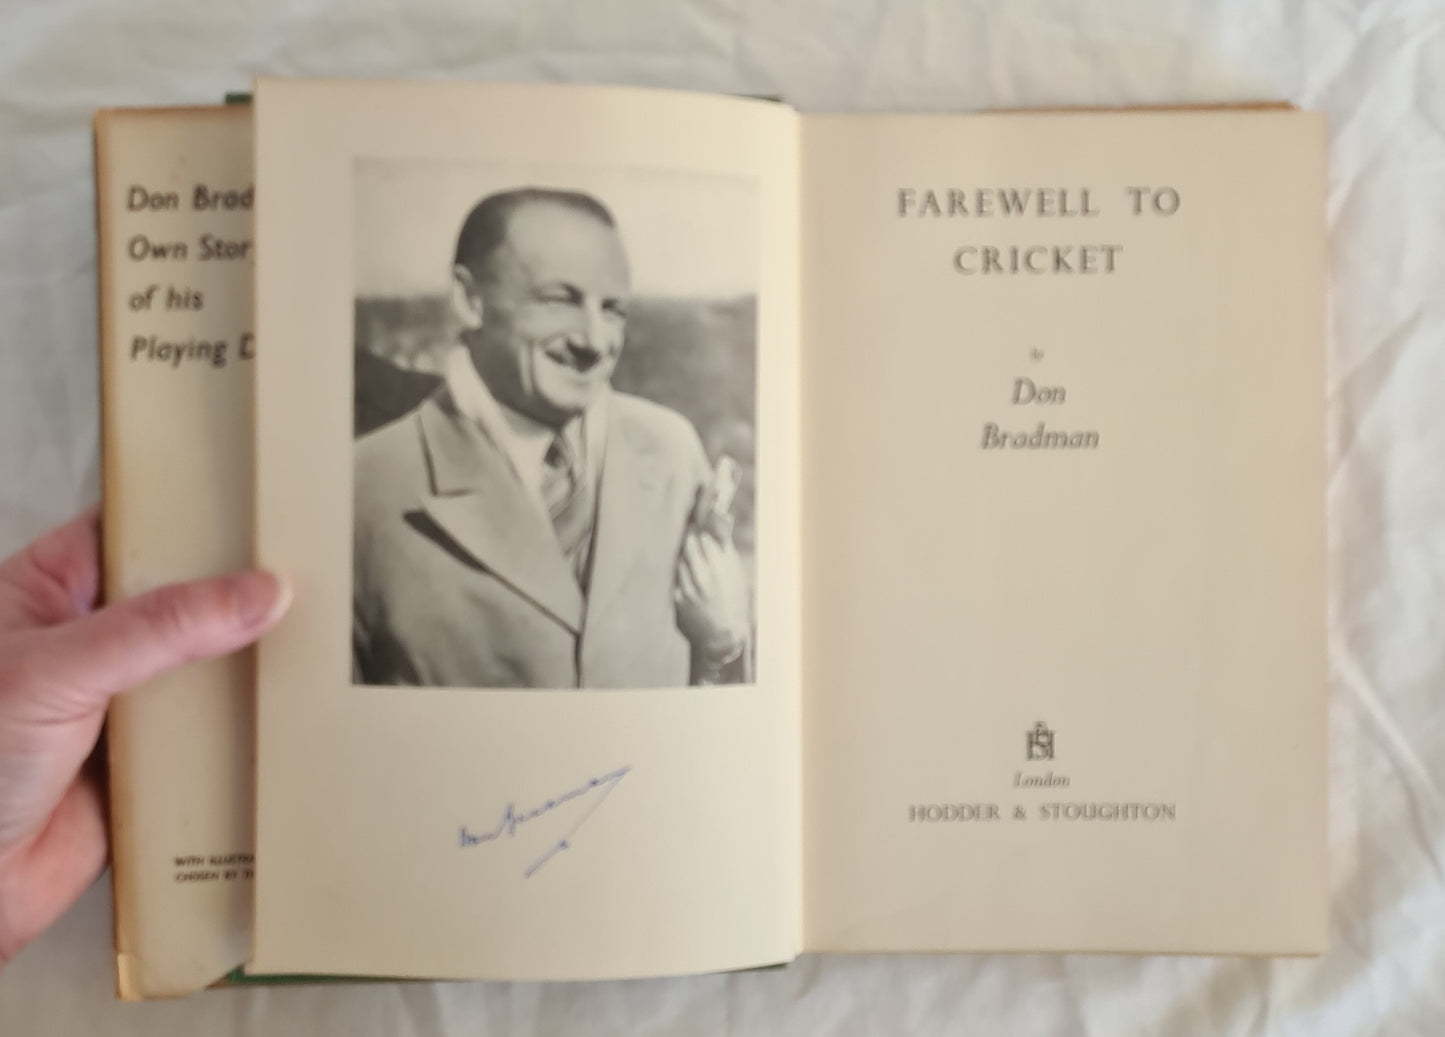 Farewell to Cricket by Don Bradman